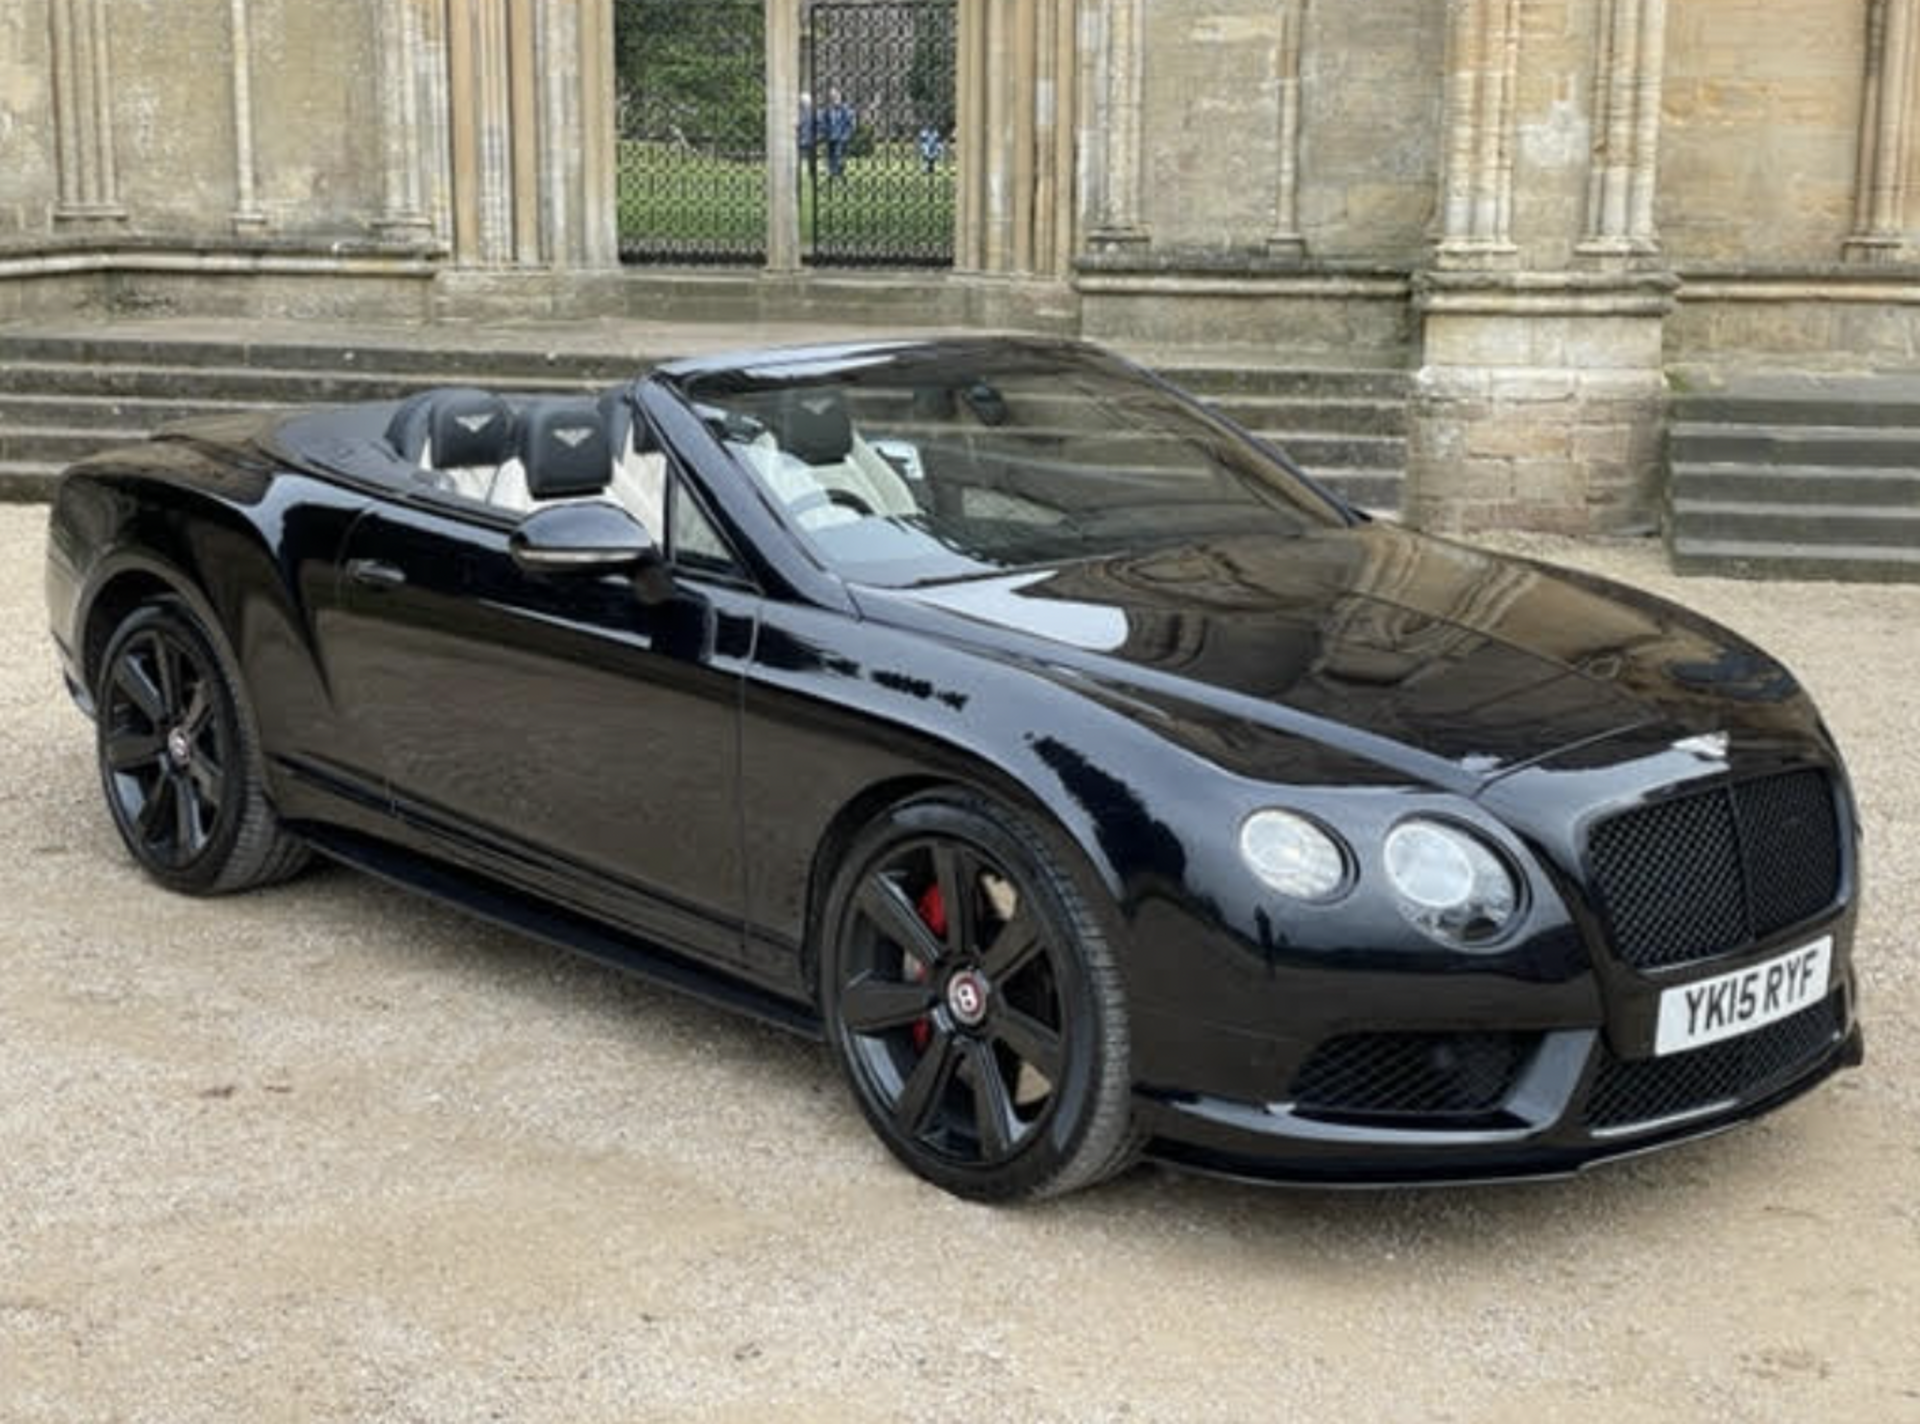 2015 Bentley Continental GTC 4.0 V8 S 2dr Auto Concourse series - Black pack 58,000 miles Full S/H